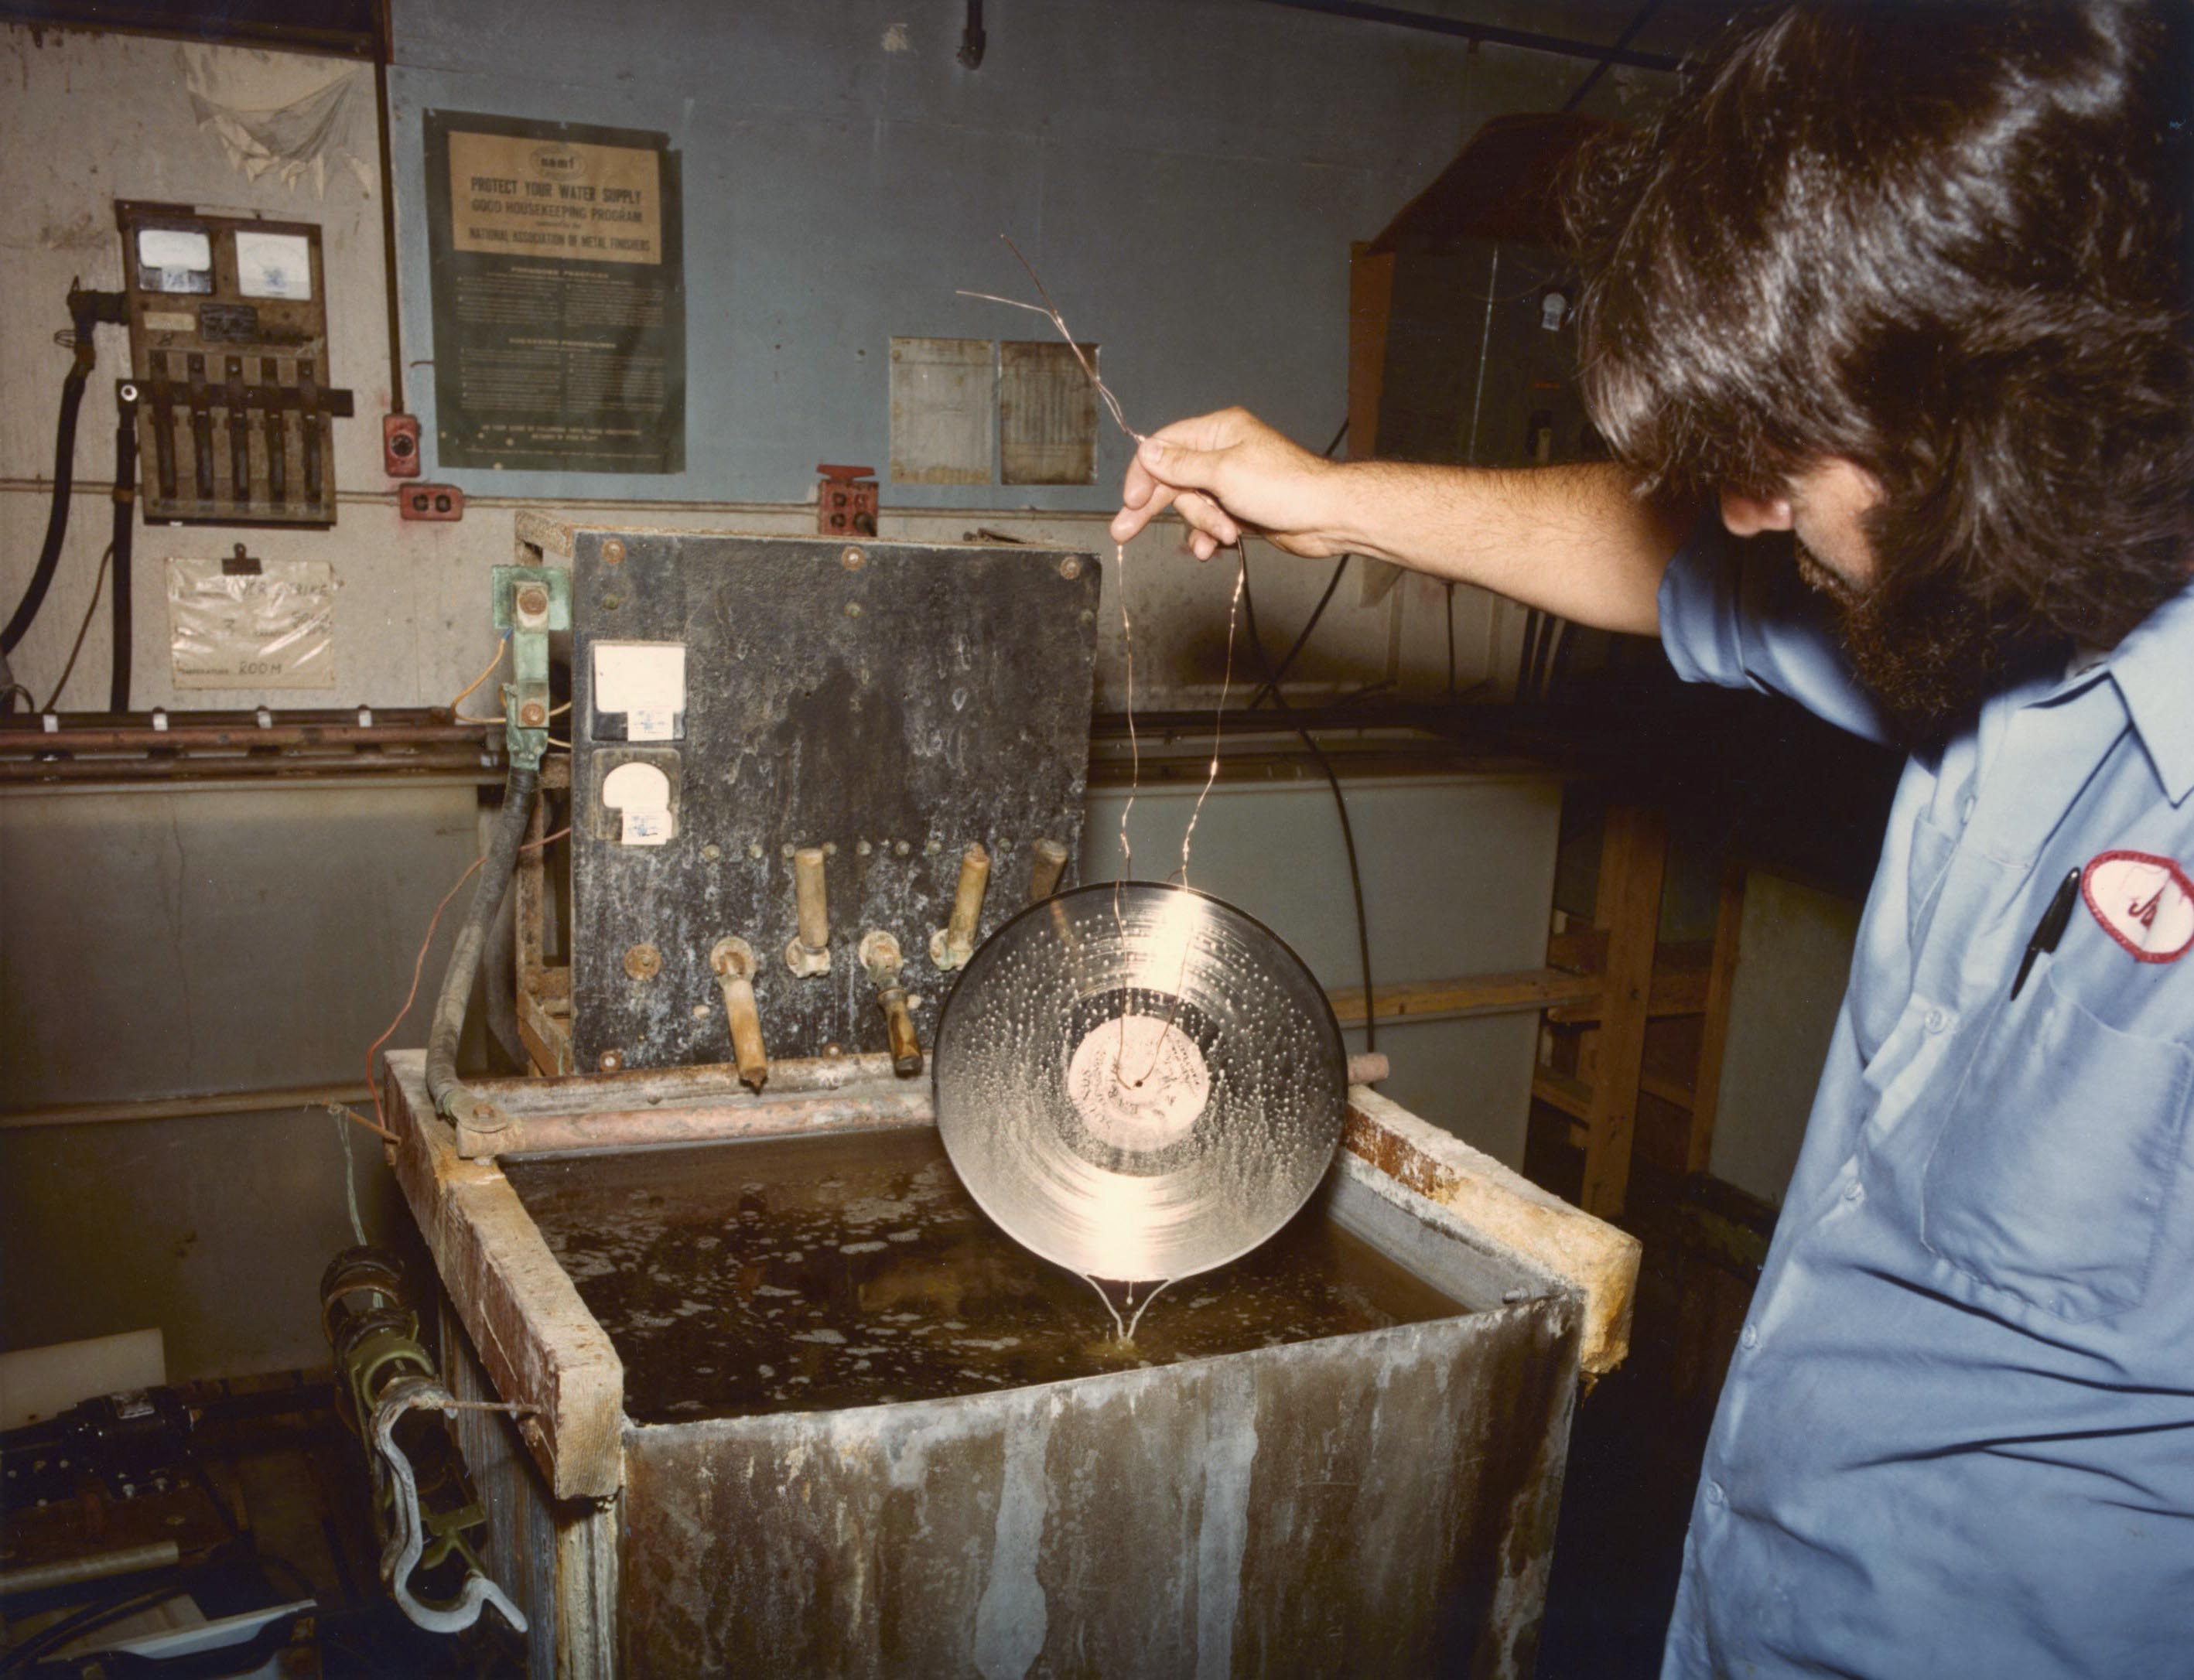 A man dips the golden record into a sink-sized vat of chemicals.